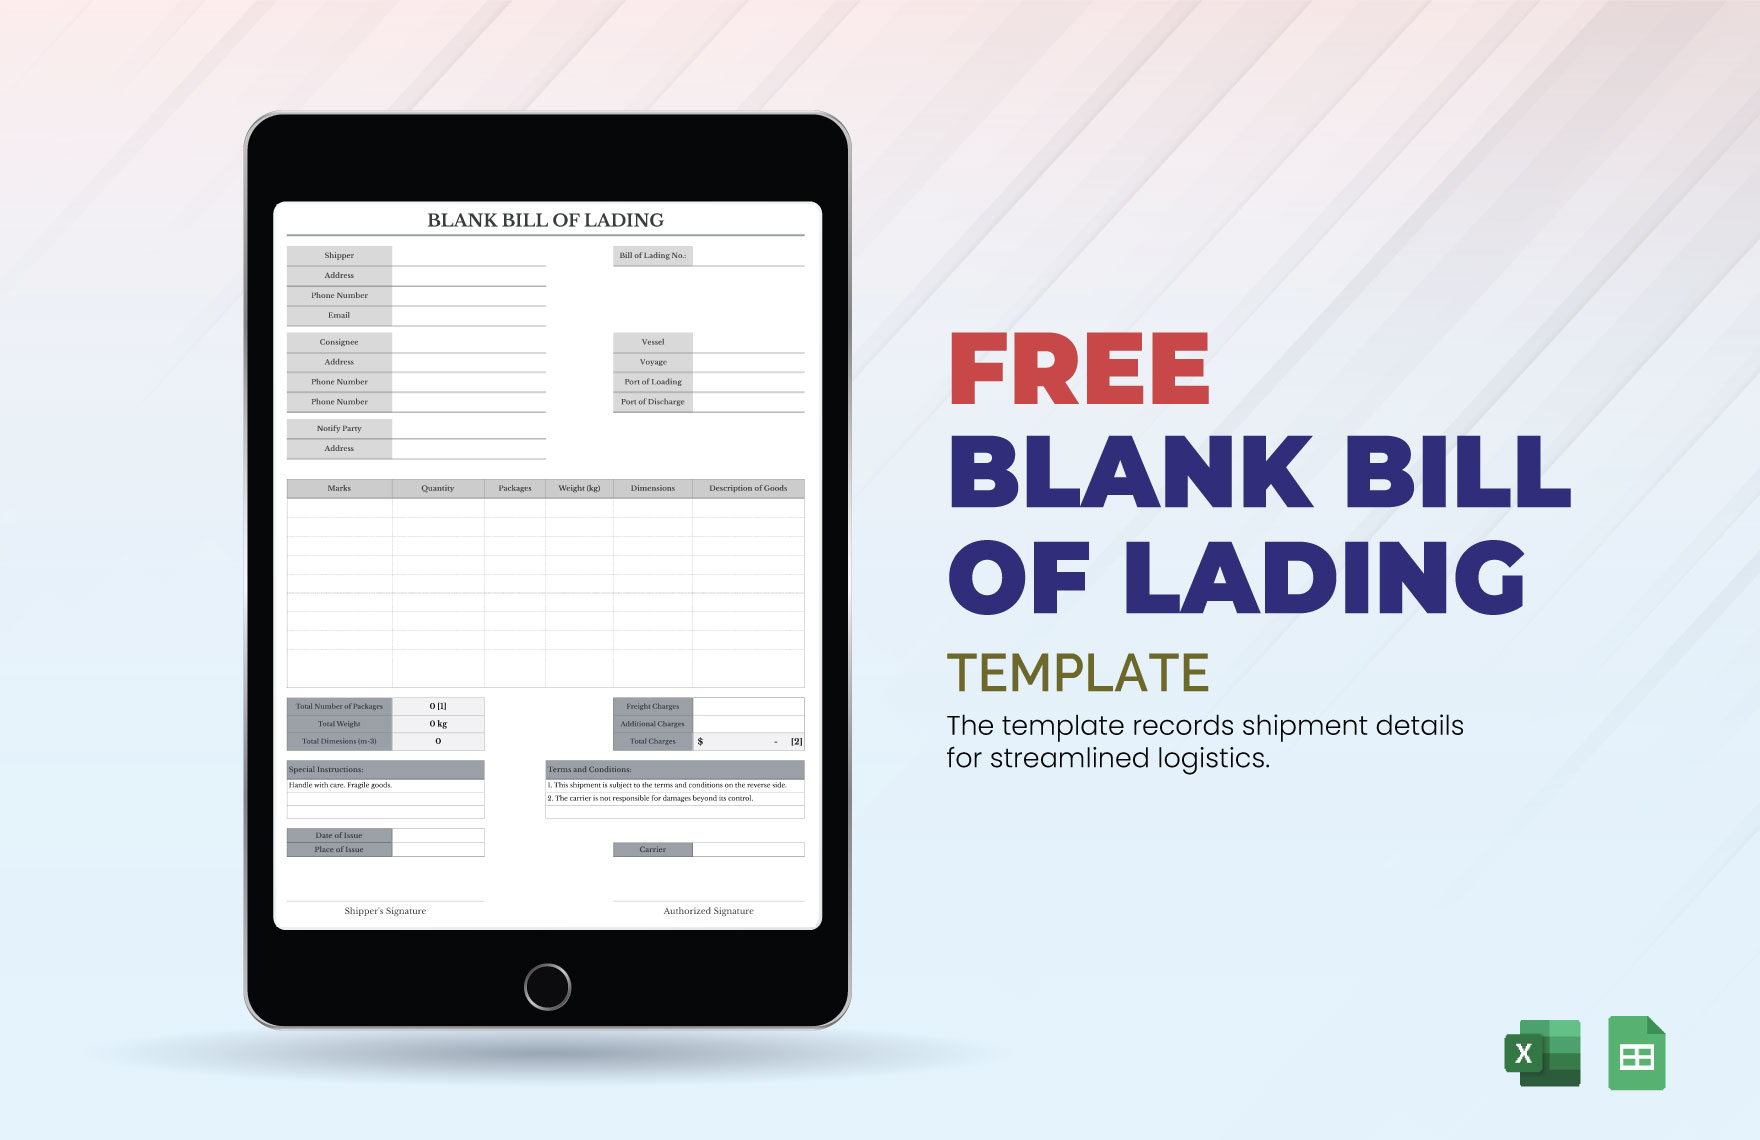 Master Bill Of Lading Template - Download in Word, Google Docs